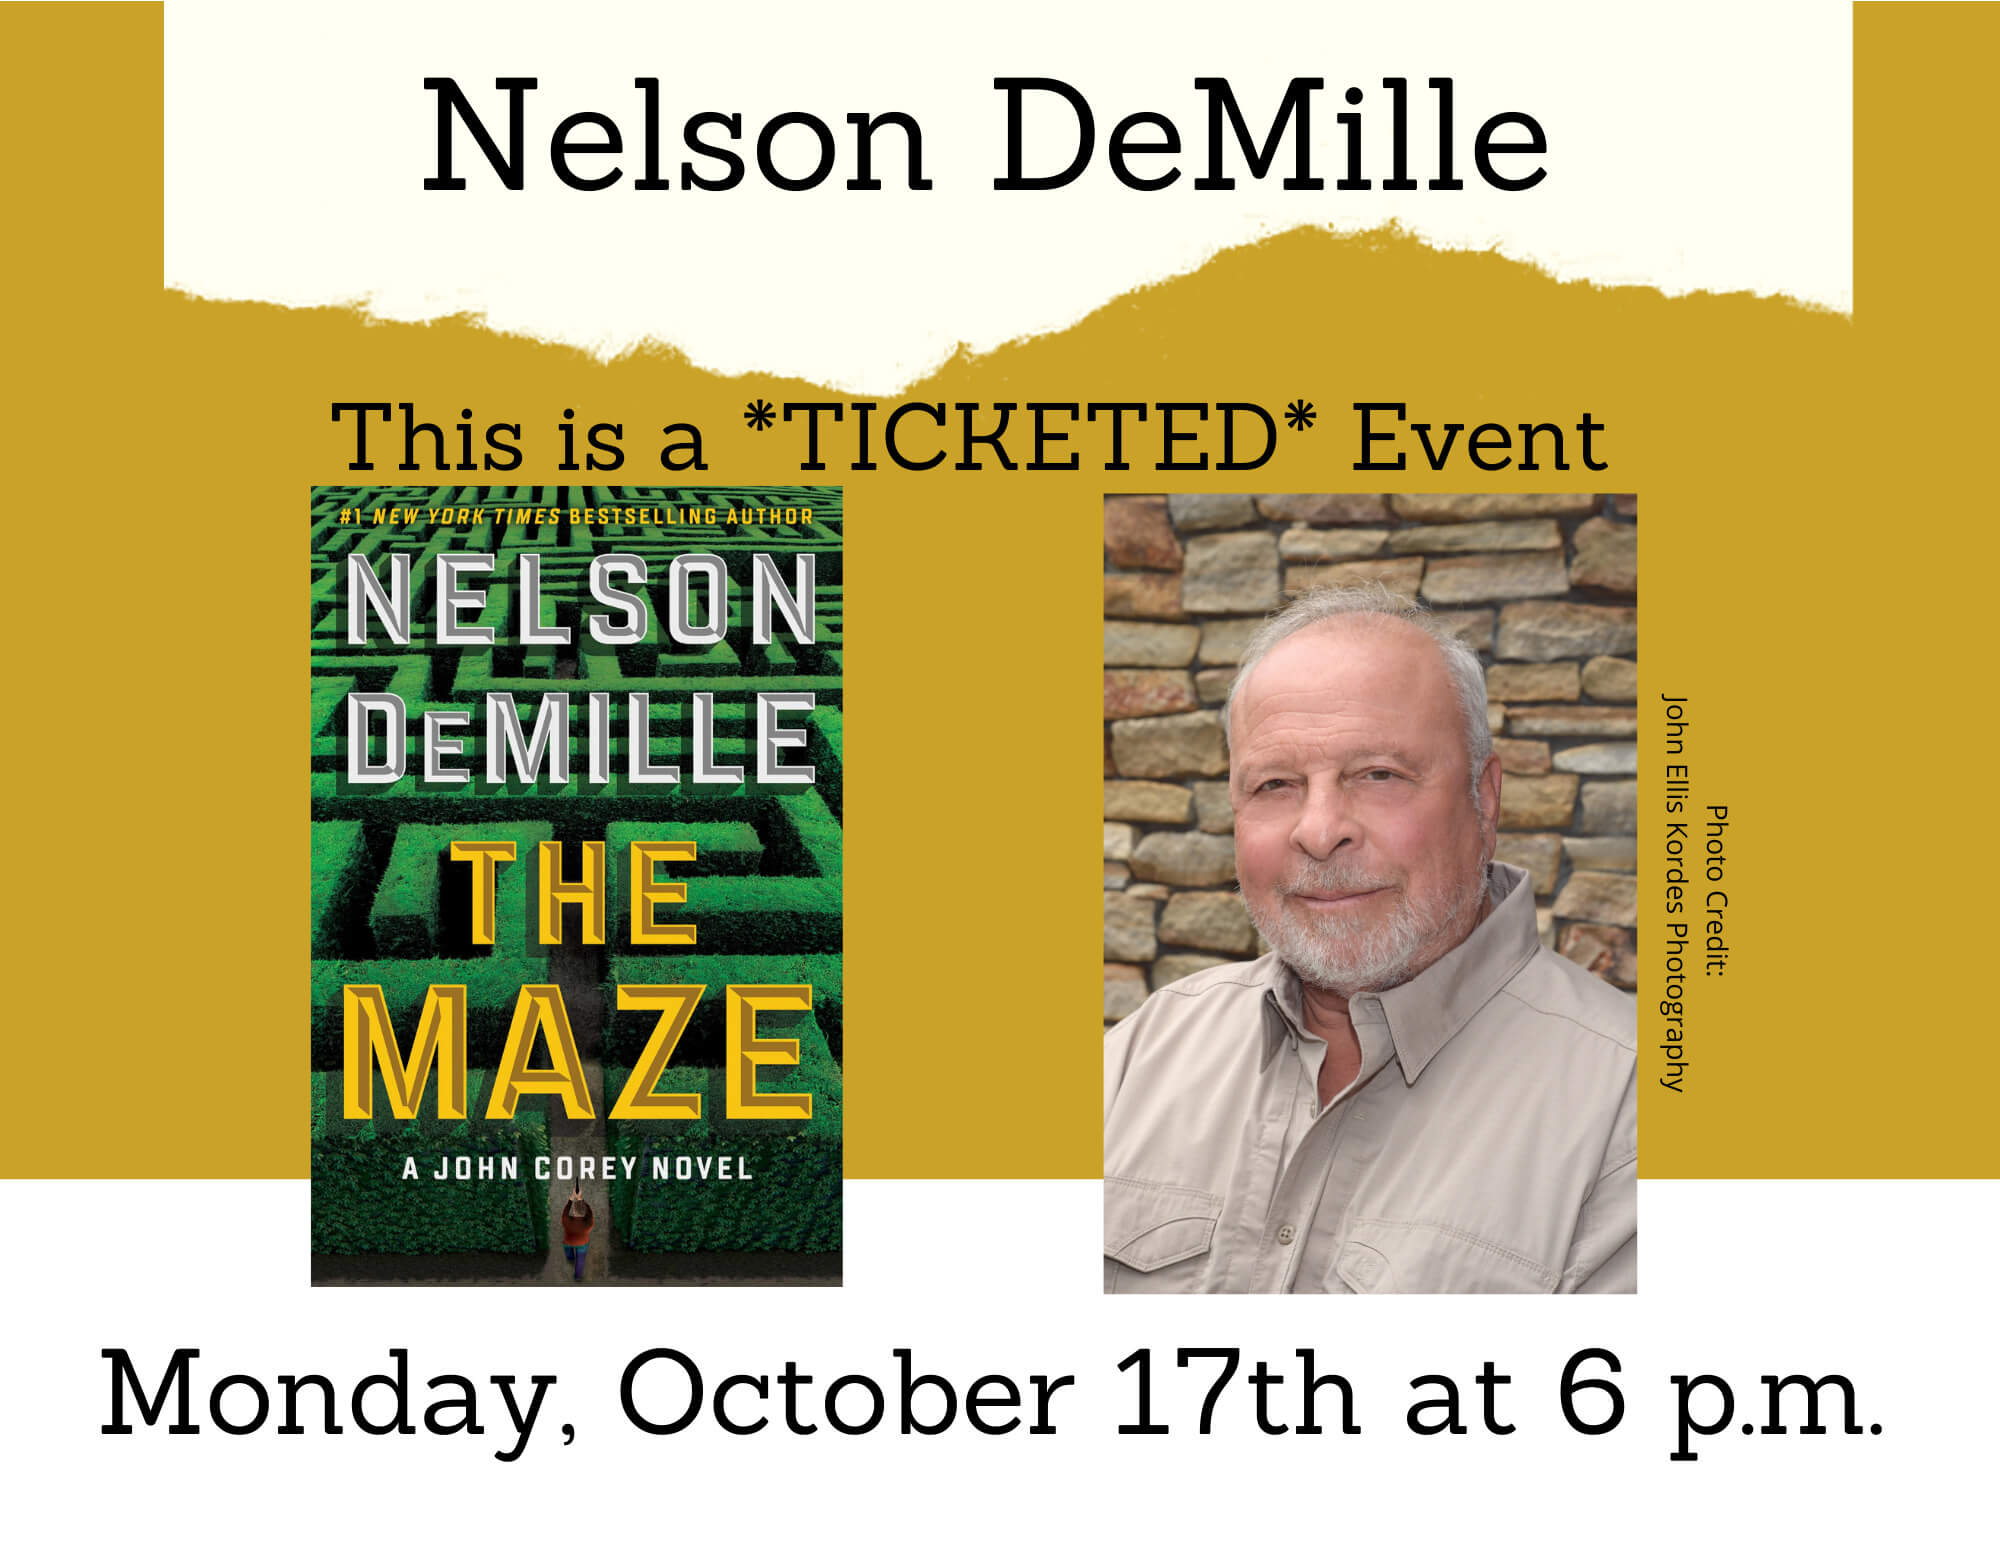 Nelson Demille presenting The Maze